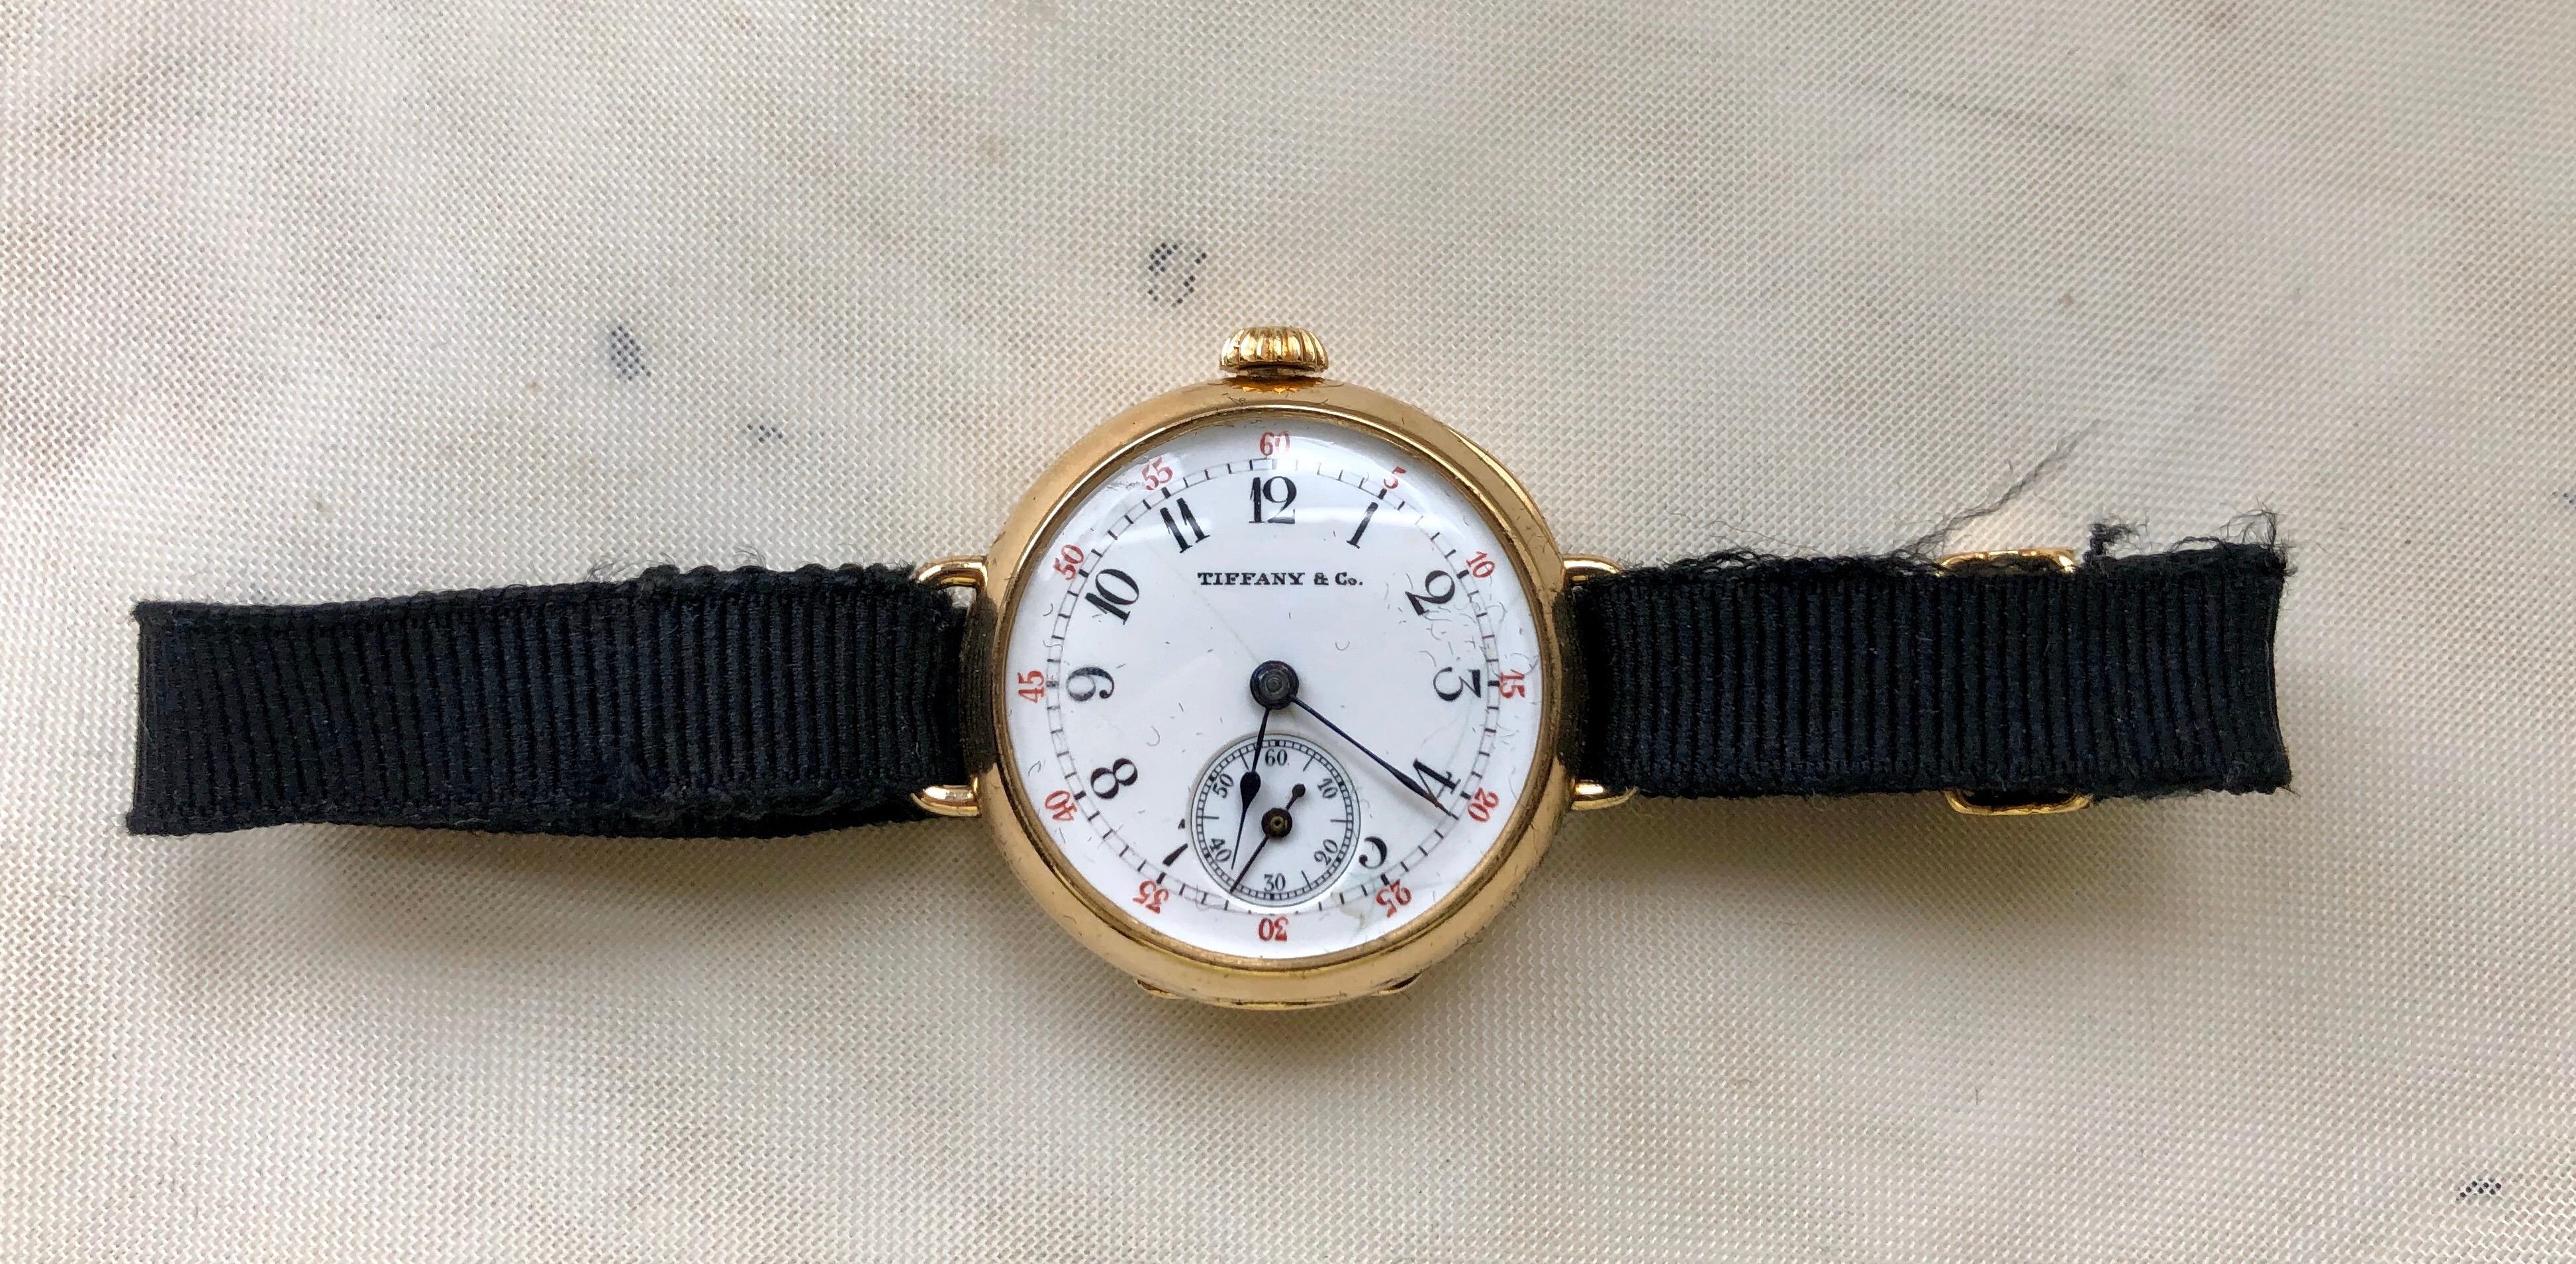 Tiffany & Co. 18K Yellow Gold Ladies Wristwatch

This vintage authentic Tiffany ladies wristwatch is in a pocket watch style with a sideways dial.

Manual Hand winding movement.

The case is approx. 26mm

White dial with red and black markers